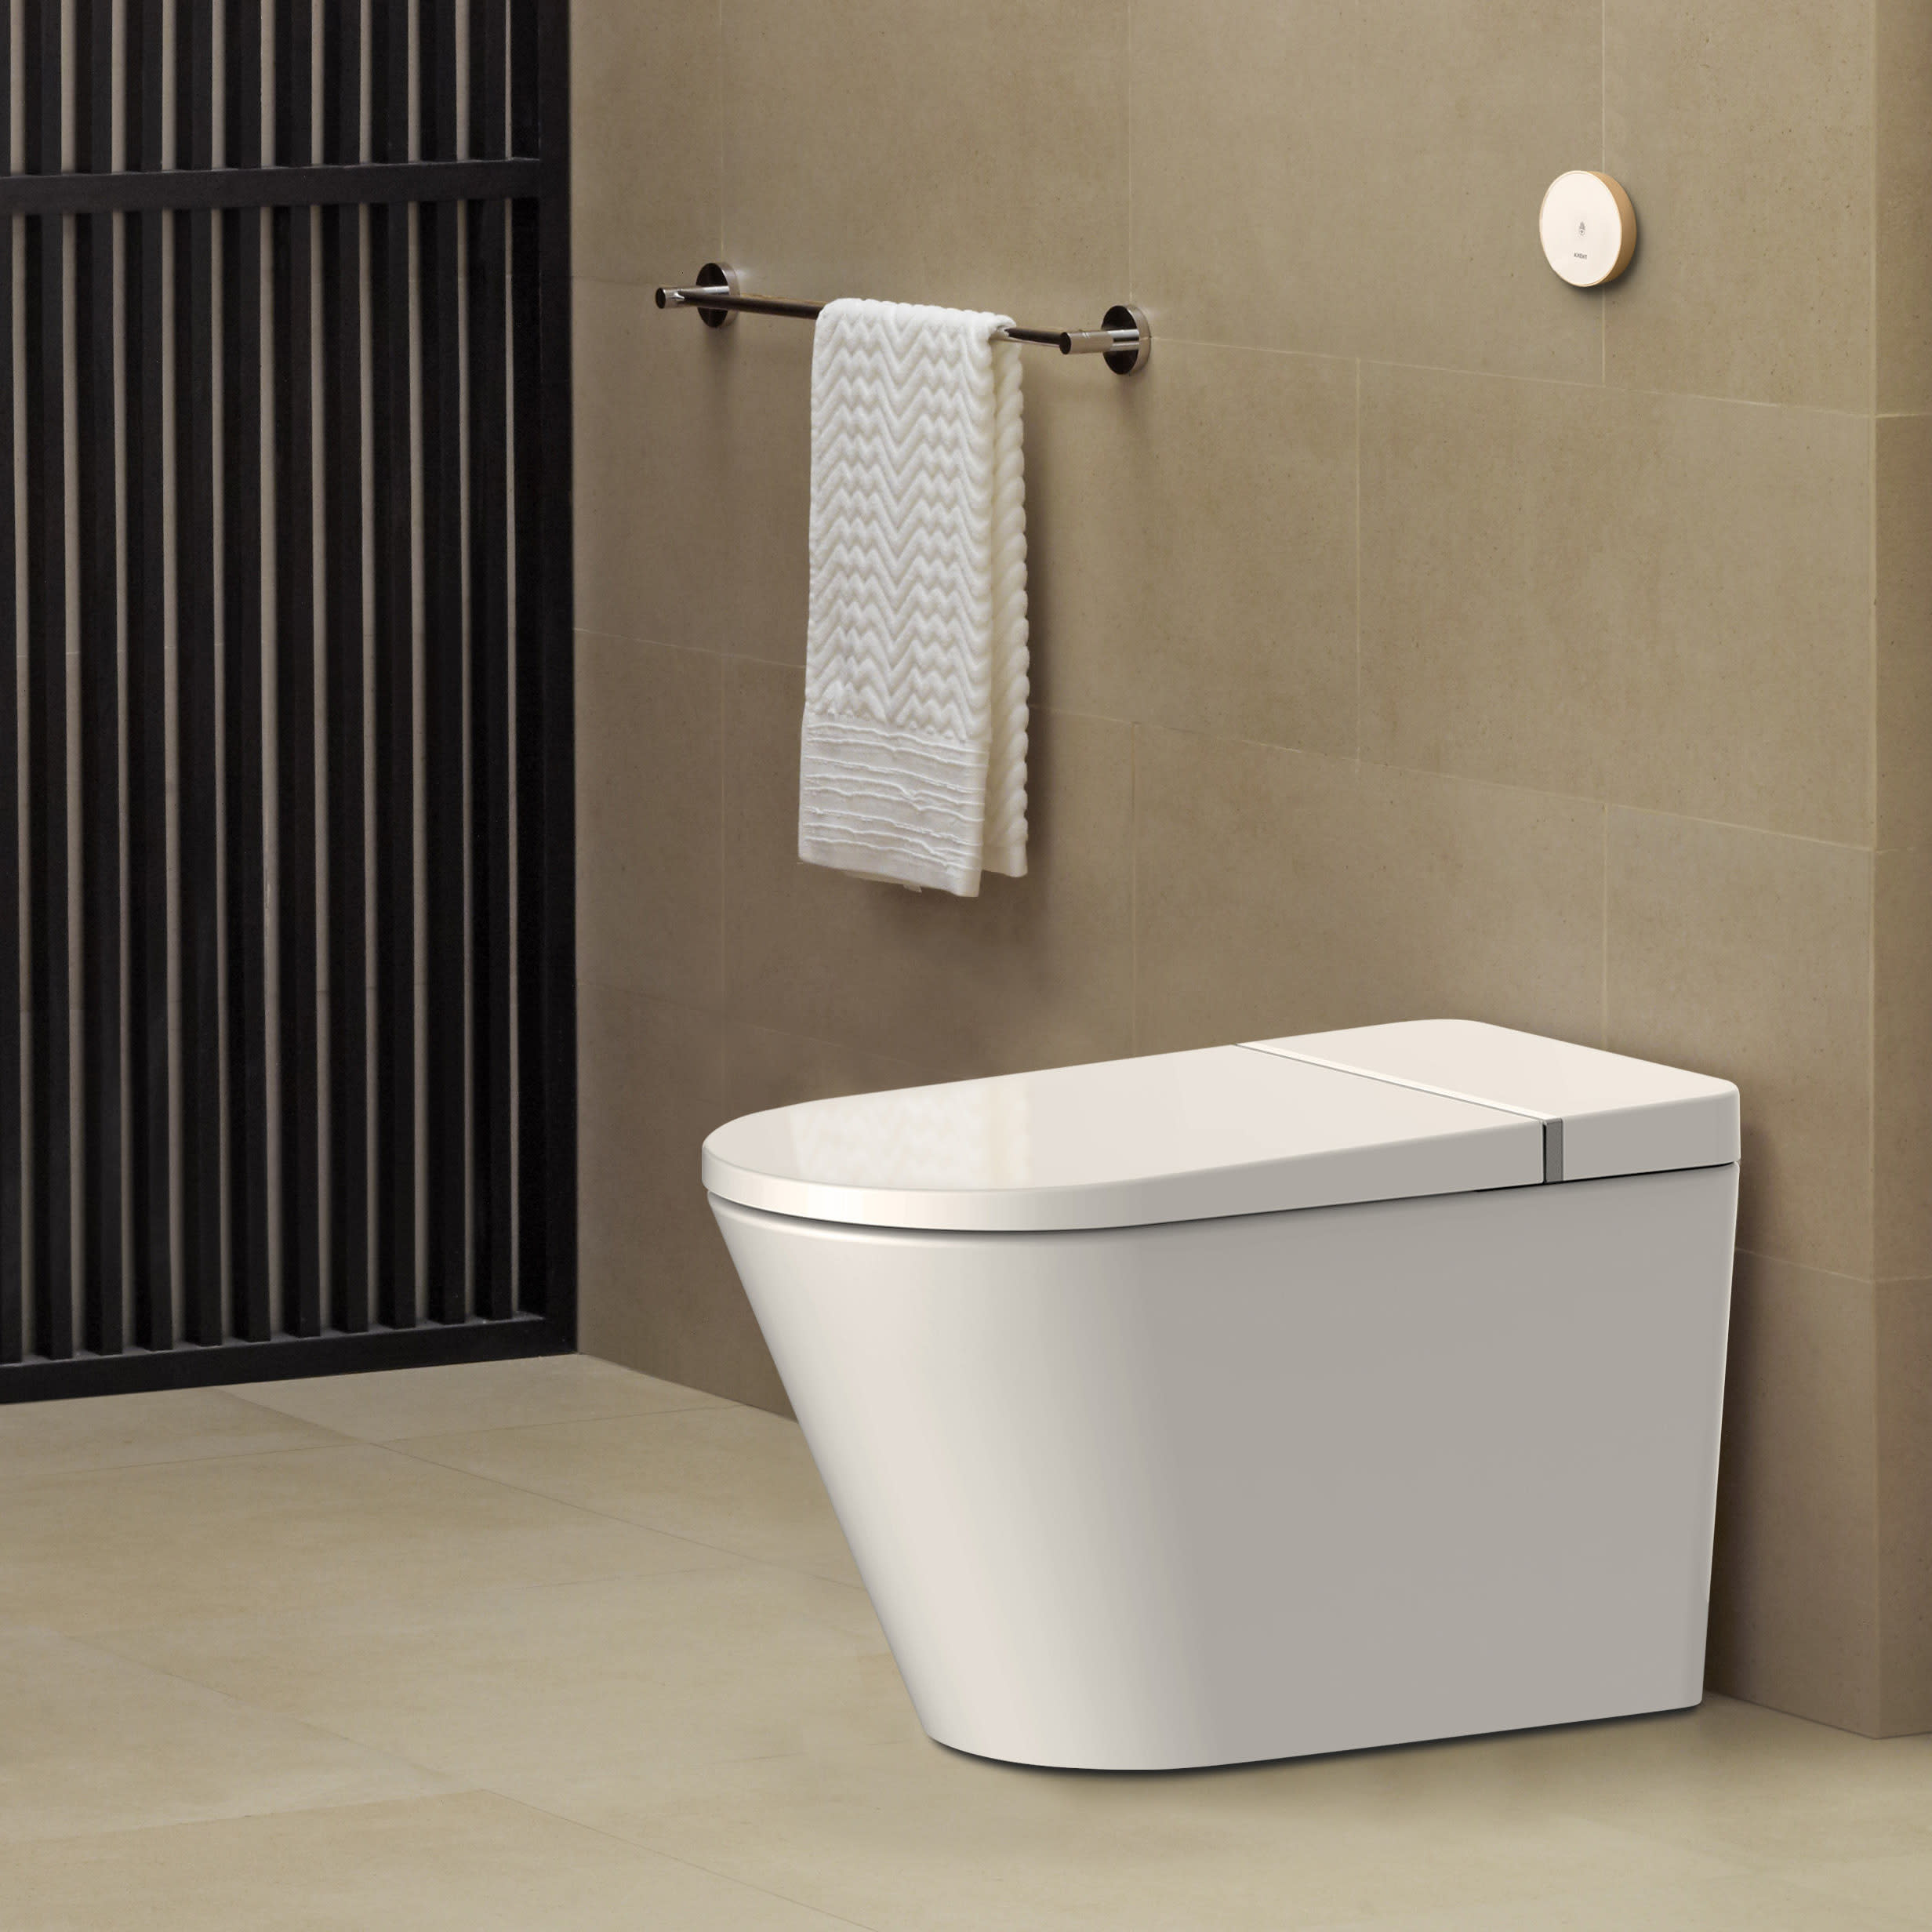 kapre Vedholdende frivillig Axent W331-04 Primus 2.0 Tankless Toilet | QualityBath.com